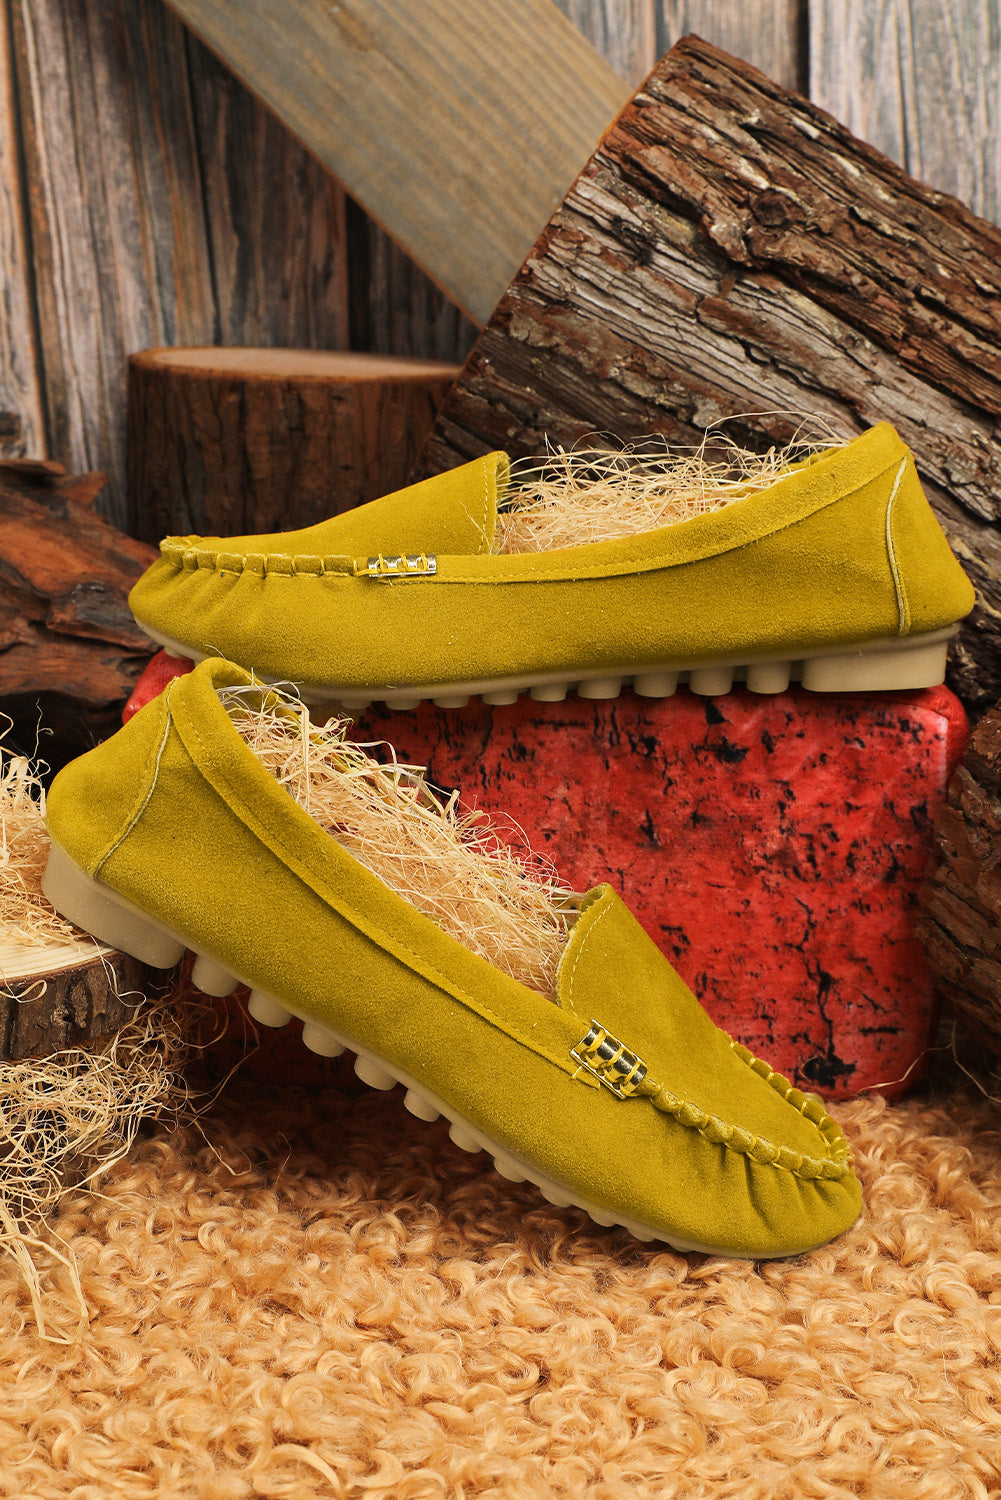 Yellow Mustard Slip On Flat Suede Loafers